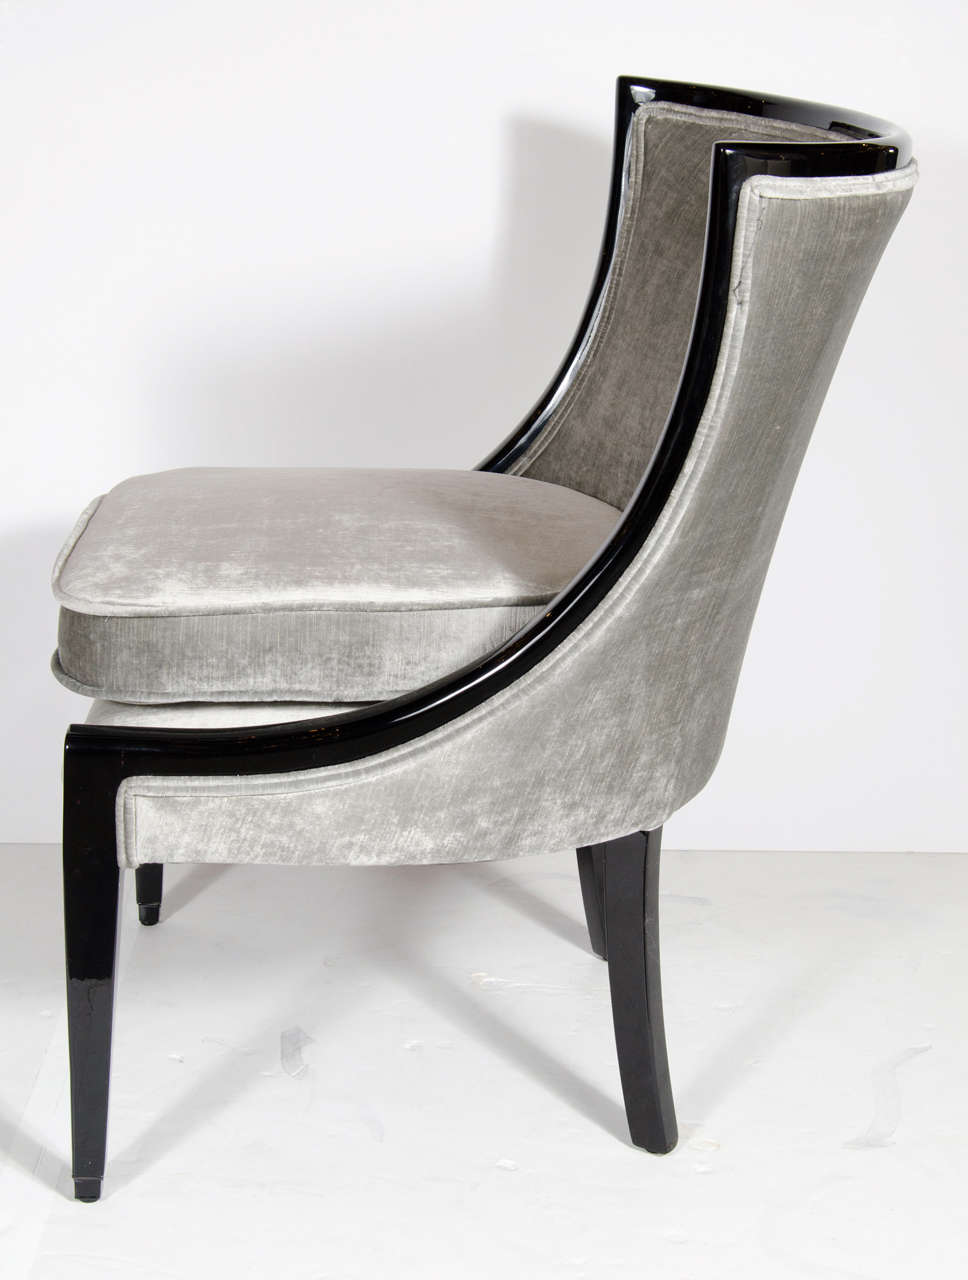 American Luxe Pair of Klismos Chairs With Curved back Design